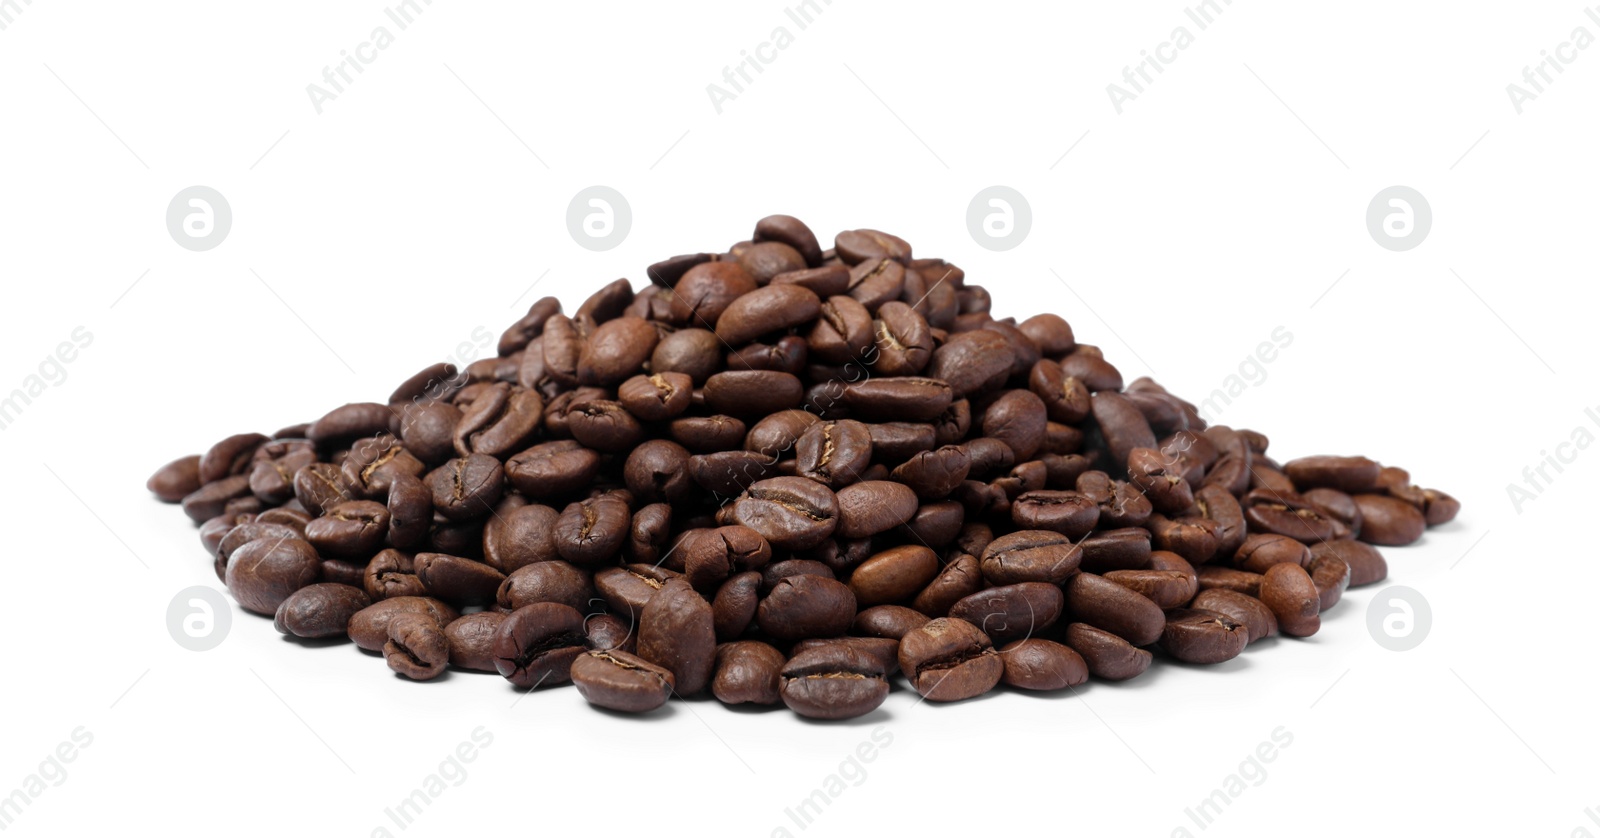 Photo of Pile of roasted coffee beans on white background